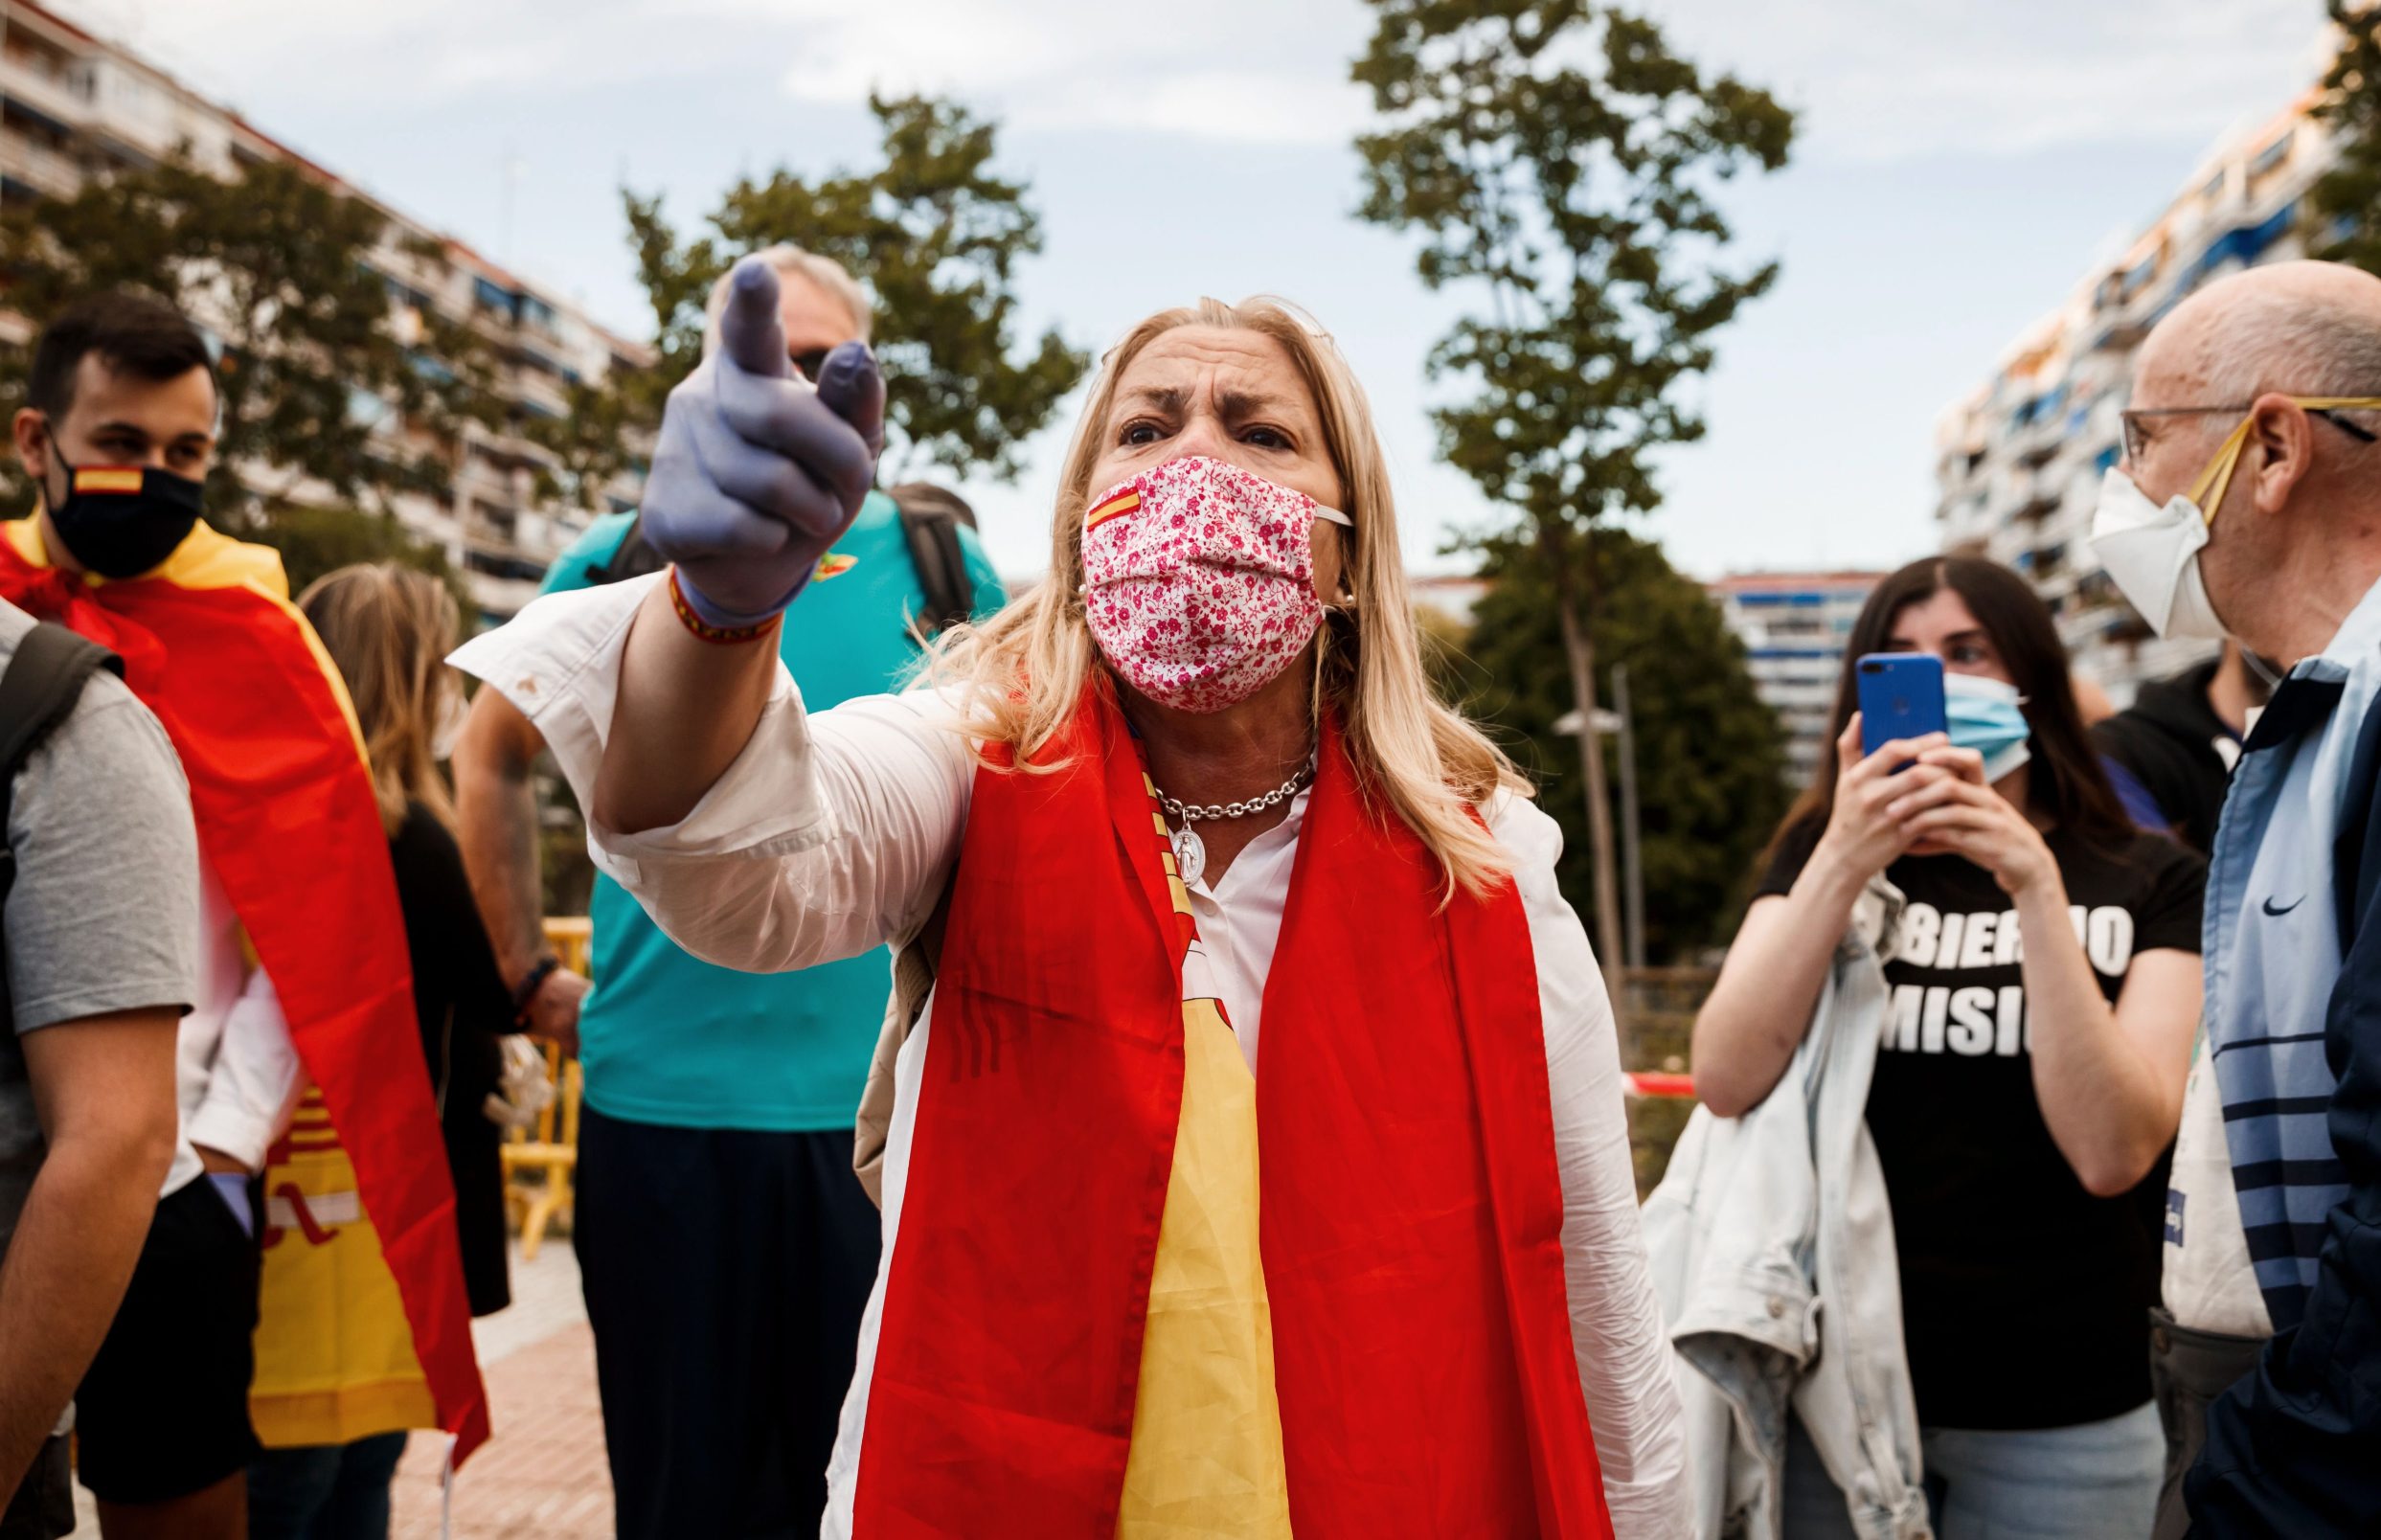 TOPSHOT - A woman wrapped in a Spanish flag shouts against counter protestrs during a protest against the government's handling of the coronavirus crisis, on May 19, 2020, in Alcorcon, near Madrid. - Most Spaniards support the lockdown and believe it should be extended, a survey showed, despite angry protests in Madrid and elsewhere denouncing the government's handling of the coronavirus crisis. Renewed four times, the state of emergency has let the government impose some of the world's tightest restrictions on Spain's nearly 47 million population, although it has since begun a cautious rollback which is due to finish by late June. (Photo by Baldesca SAMPER / AFP)